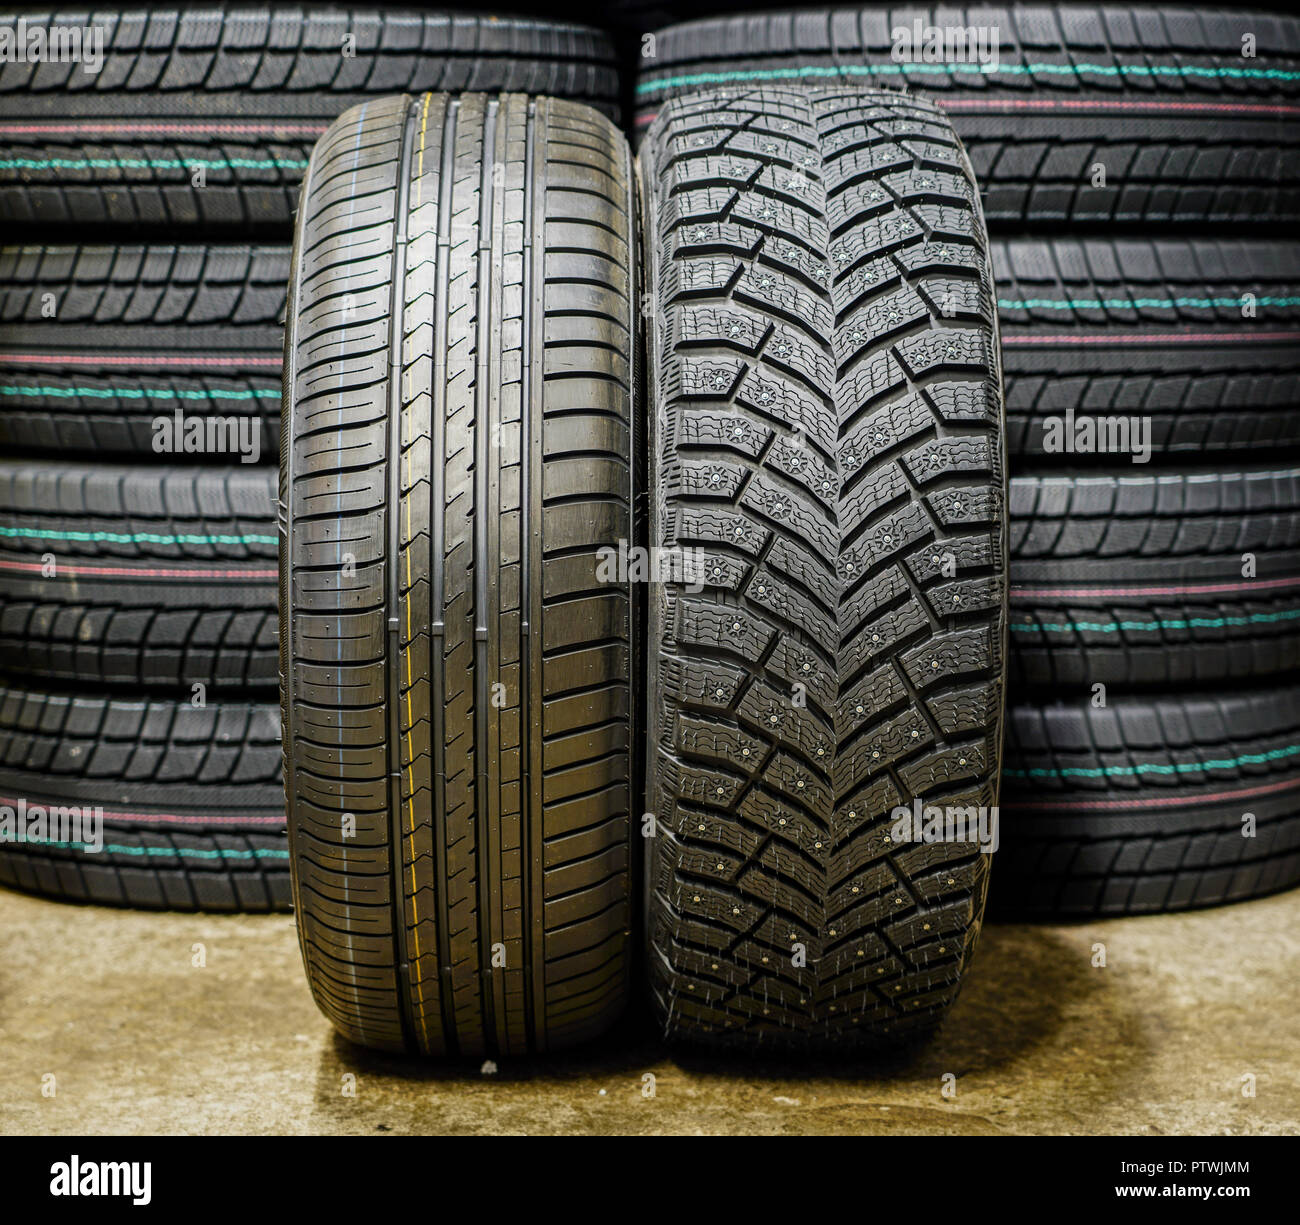 beside new winter tire with studs and summer tire Stock Photo